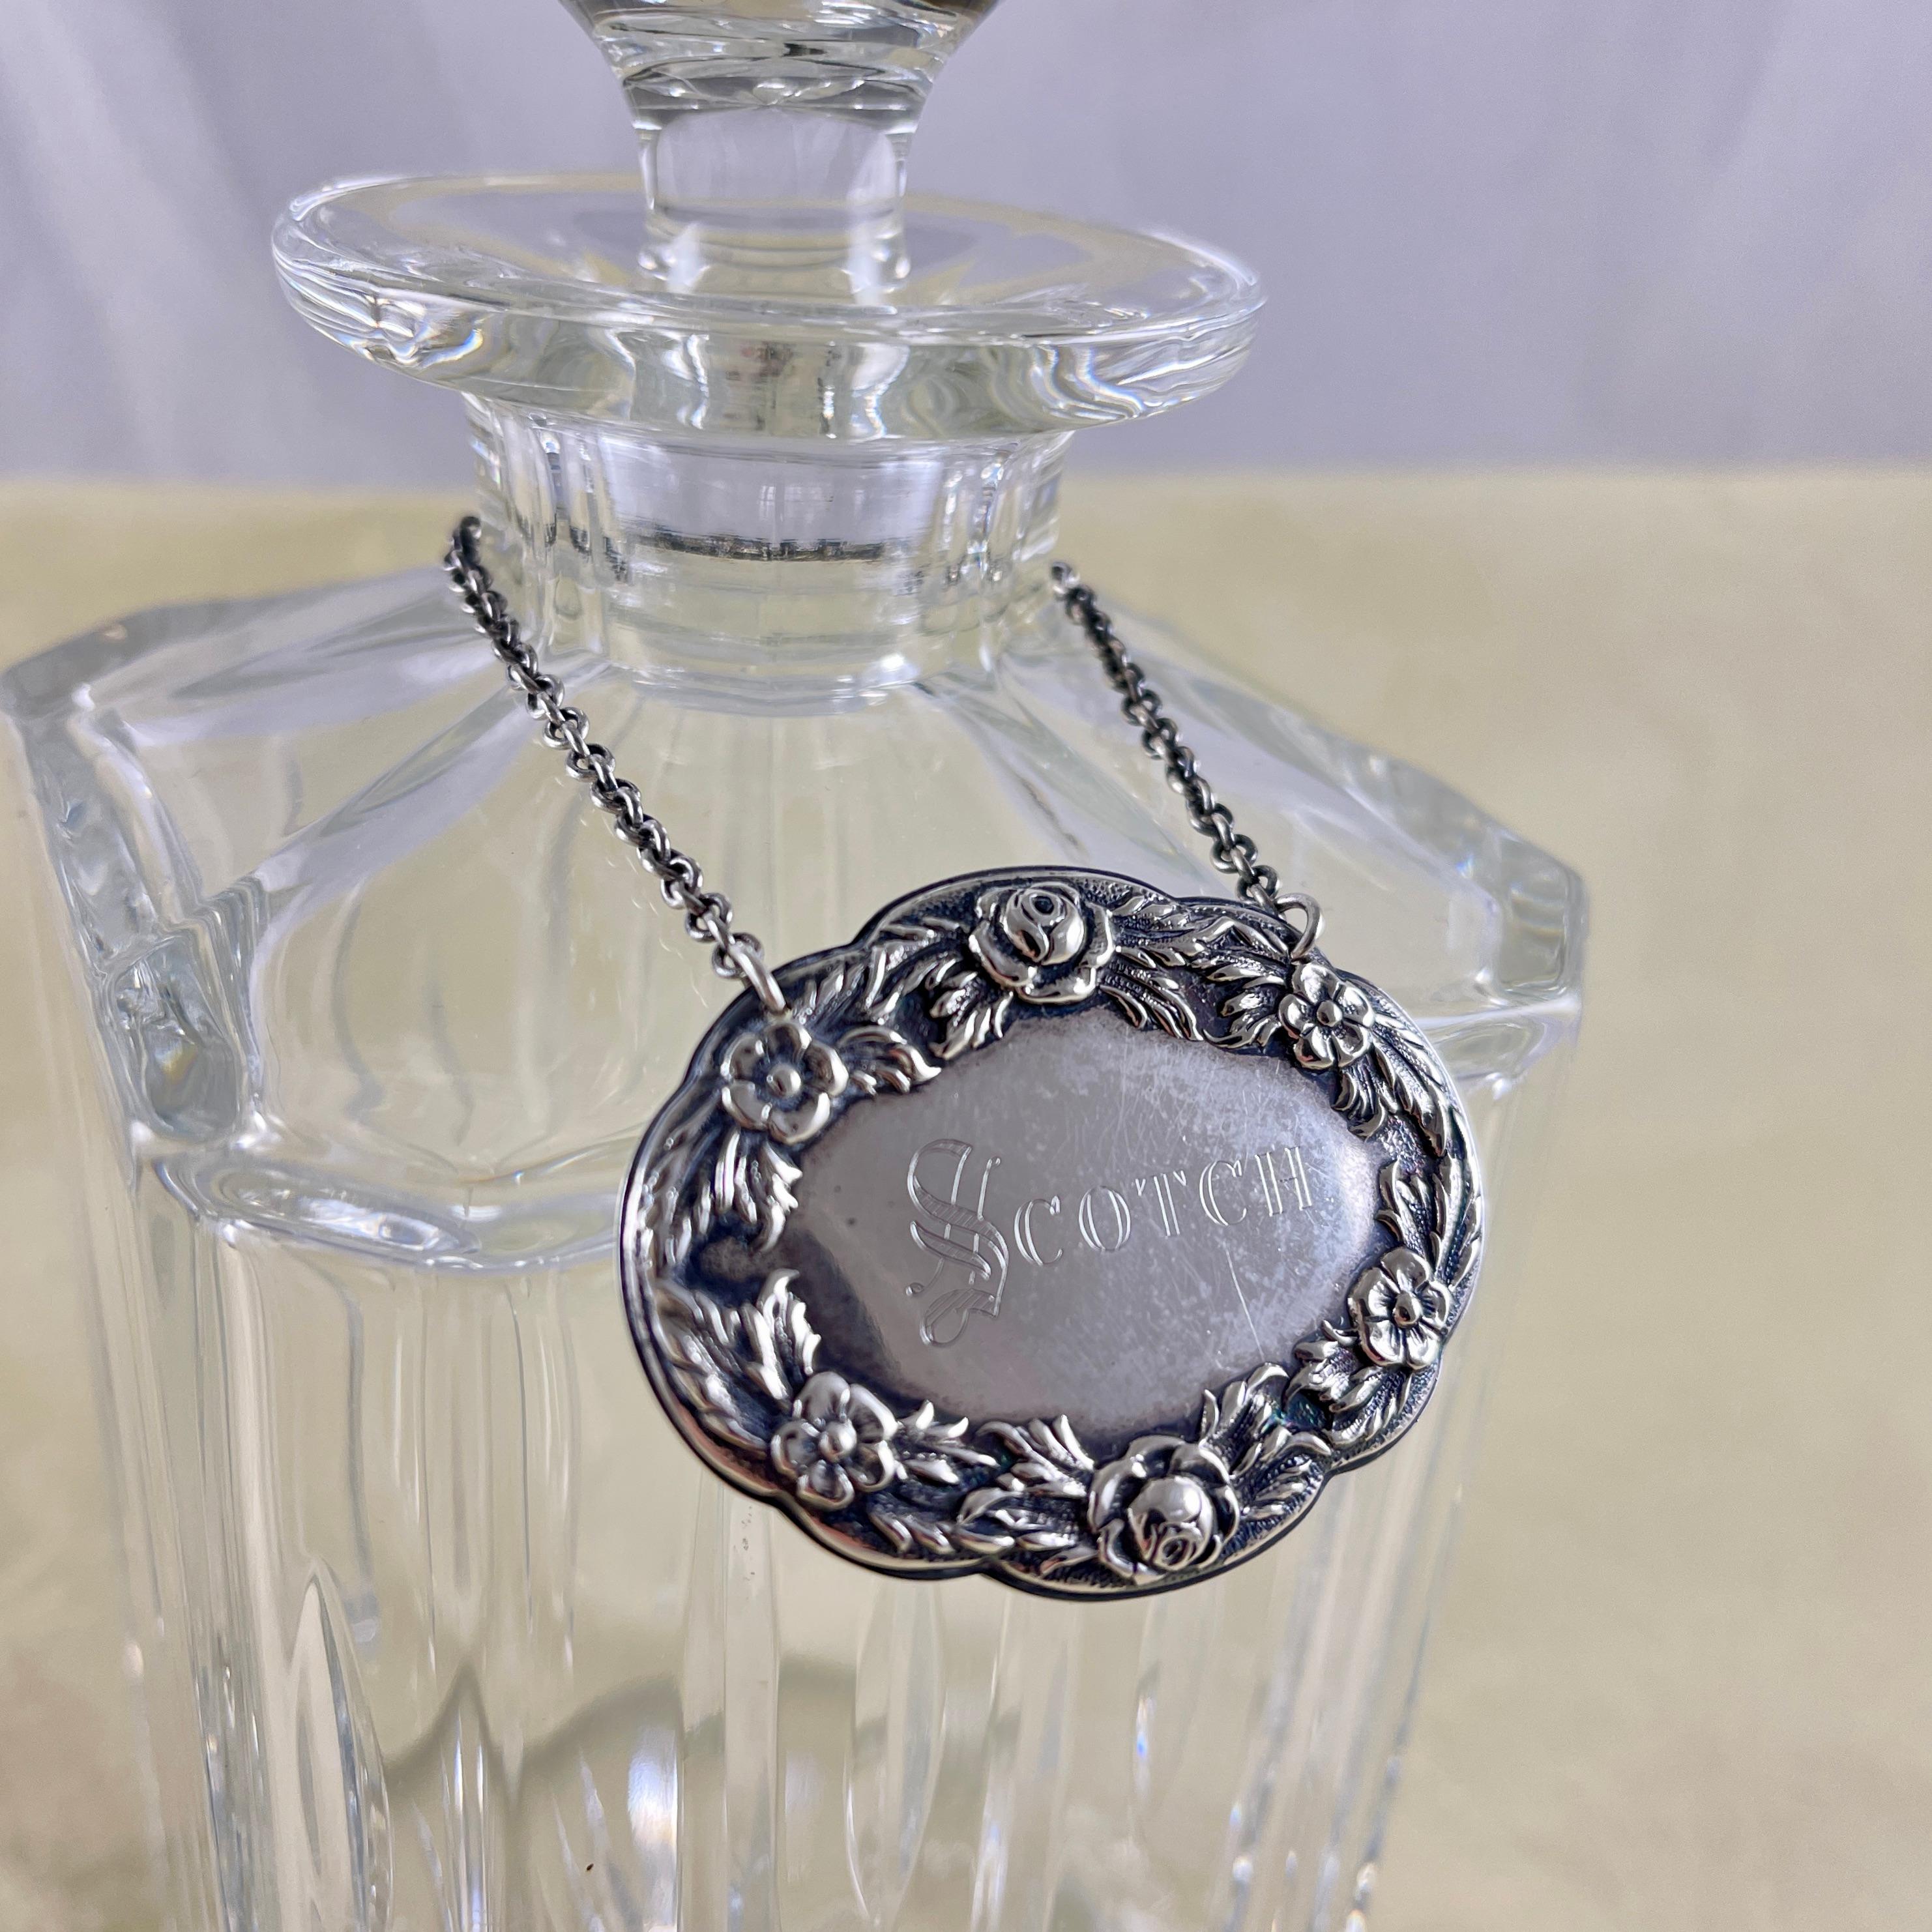 From the S. Kirk & Sons Silver Company in Baltimore, Maryland, a sterling silver liquor collar tag, circa 1860s.

The oval tag has a Repousse Rose and floral garland border, and is engraved, Scotch, in a light double block type. It hangs from a